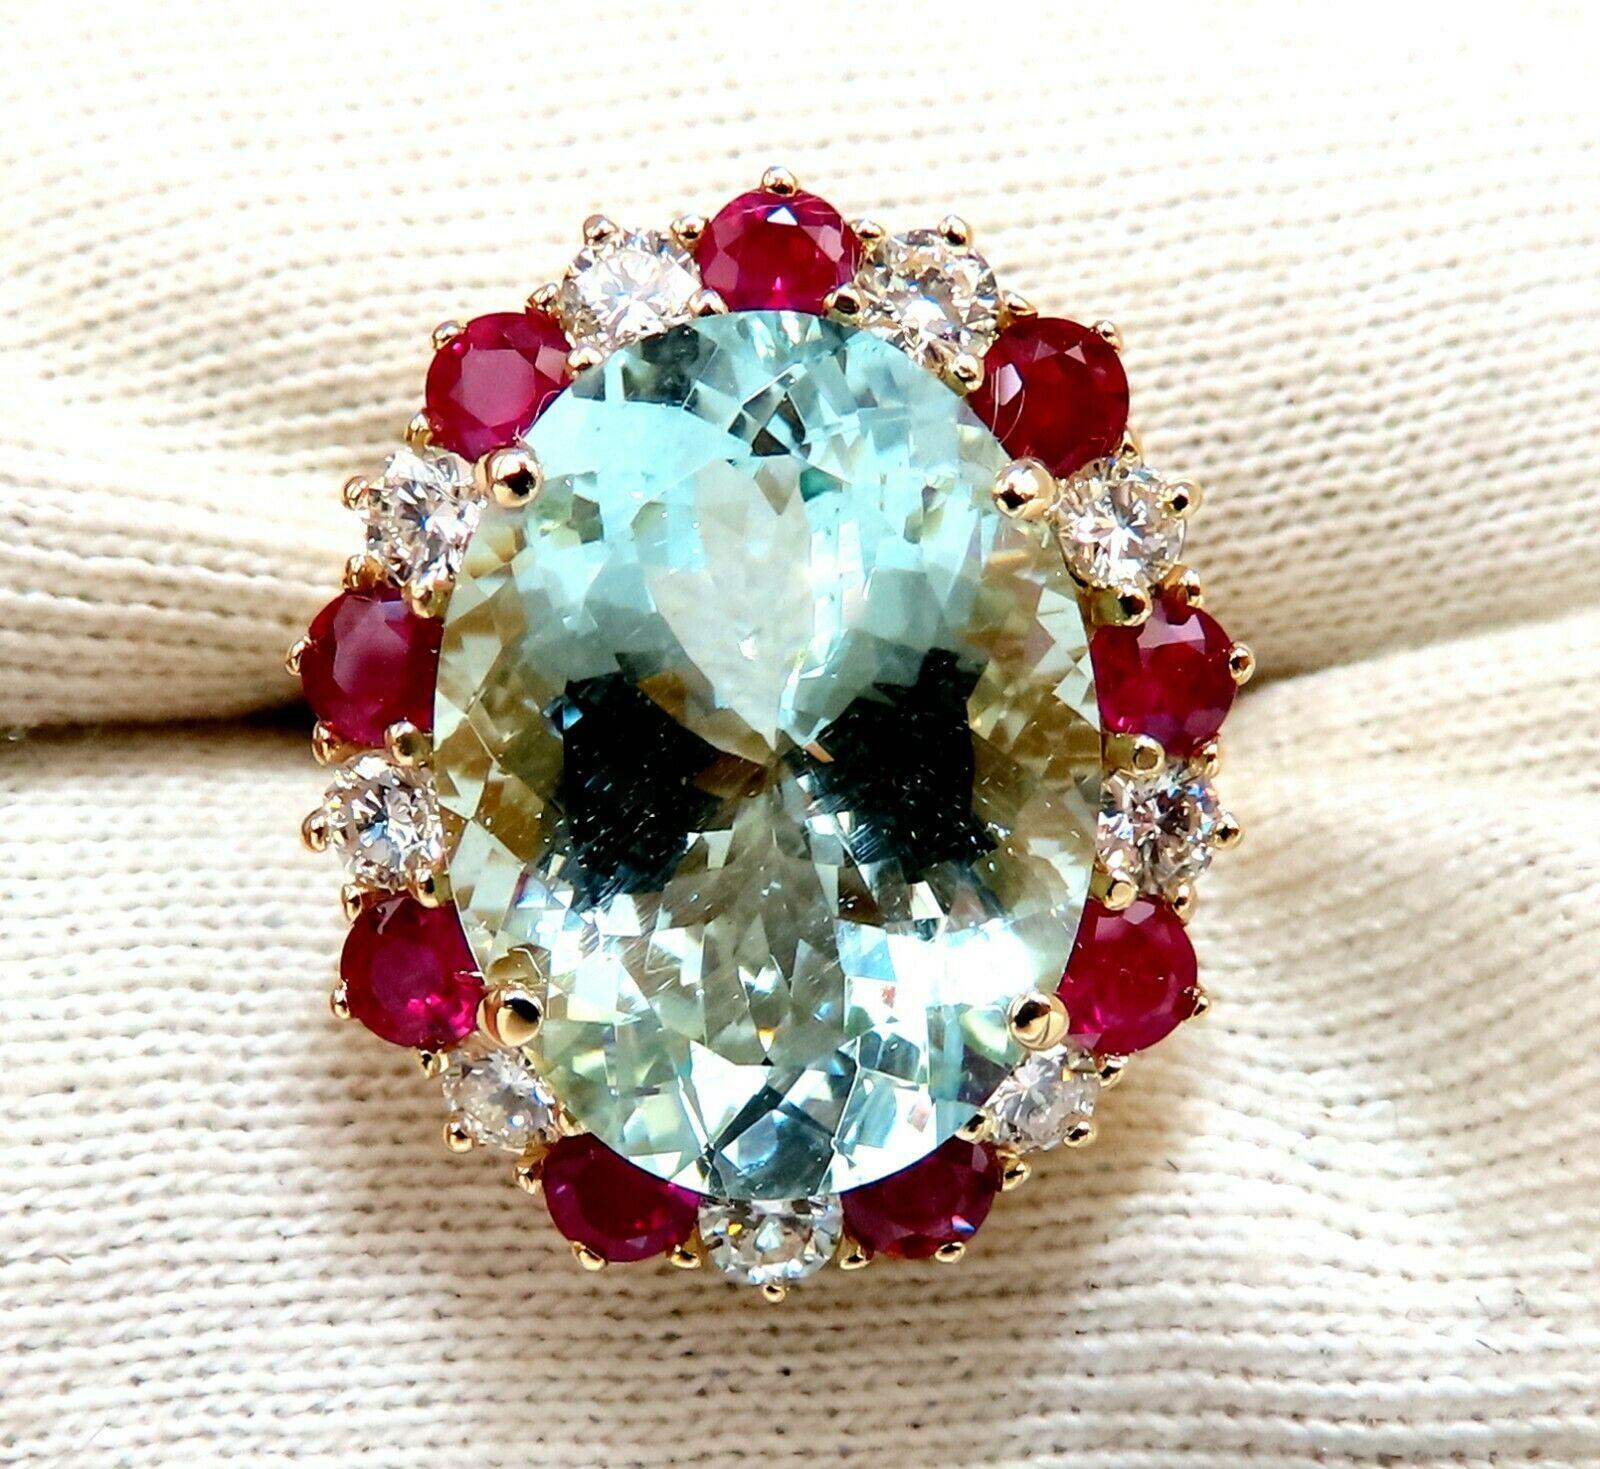 12.58ct Natural Aquamarine & 1.70ct ruby cocktail ring. 1.06ct natural diamonds: G-color vs-2 clarity. 14kt, yellow gold. Item: 10.9gms $7500
Red, White & Blue Cluster Patriot Ring

12.58ct. Natural Oval Aquamarine
Clean clarity

Transparent 18.8mm